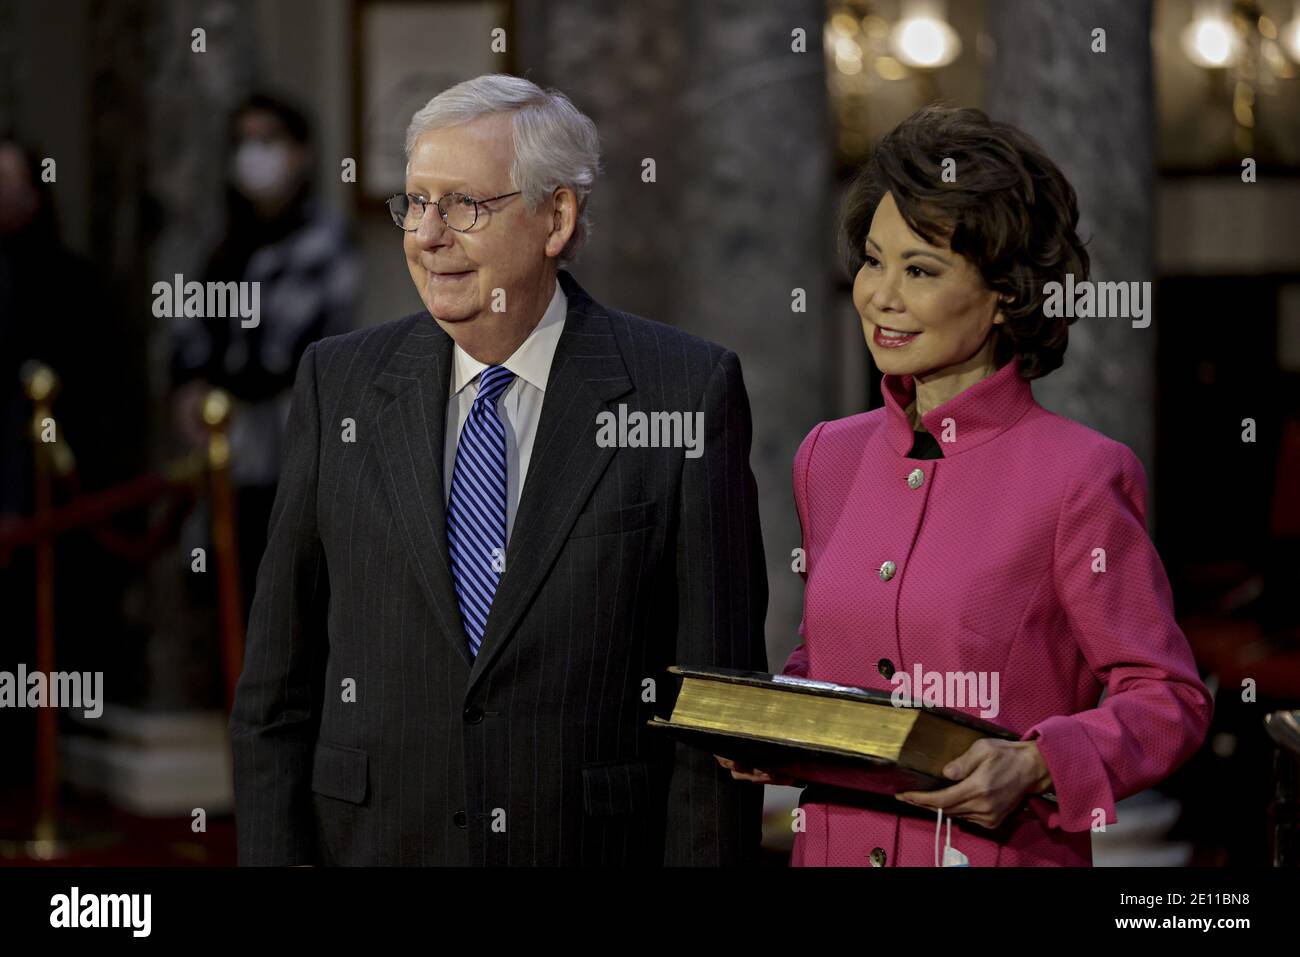 Washington, United States. 03rd Jan, 2021. Senate Majority Leader Mitch McConnell, a Republican from Kentucky, left, waits to be ceremoniously sworn-in with wife Elaine Chao, U.S. secretary of transportation, at the U.S. Capitol in Washingtonat the U.S. Capitol in Washington, DC on Sunday, January 3, 2021. The 117th Congress begins today with the election of the speaker of the House and administration of the oath of office for lawmakers in both chambers, procedures that will be modified to account for Covid-19 precautions. Pool photo Samuel Corum/UPI Credit: UPI/Alamy Live News Stock Photo